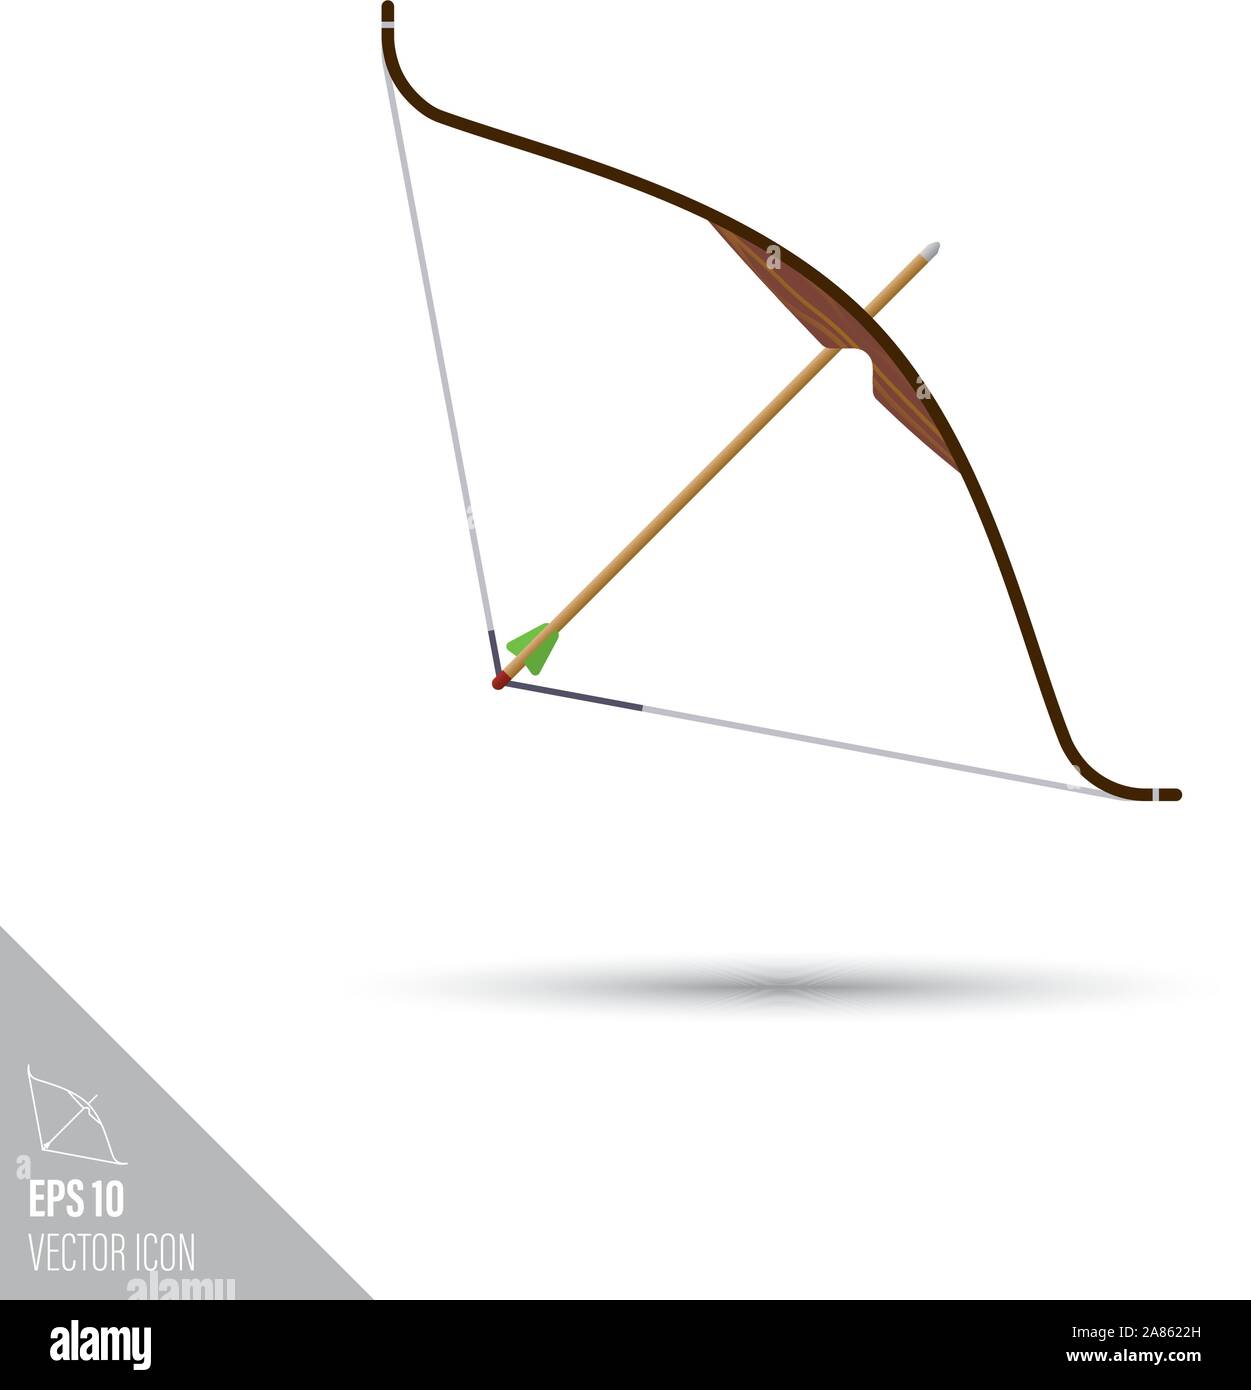 Smooth style archery bow and arrow icon. Target sports equipment vector illustration. Stock Vector